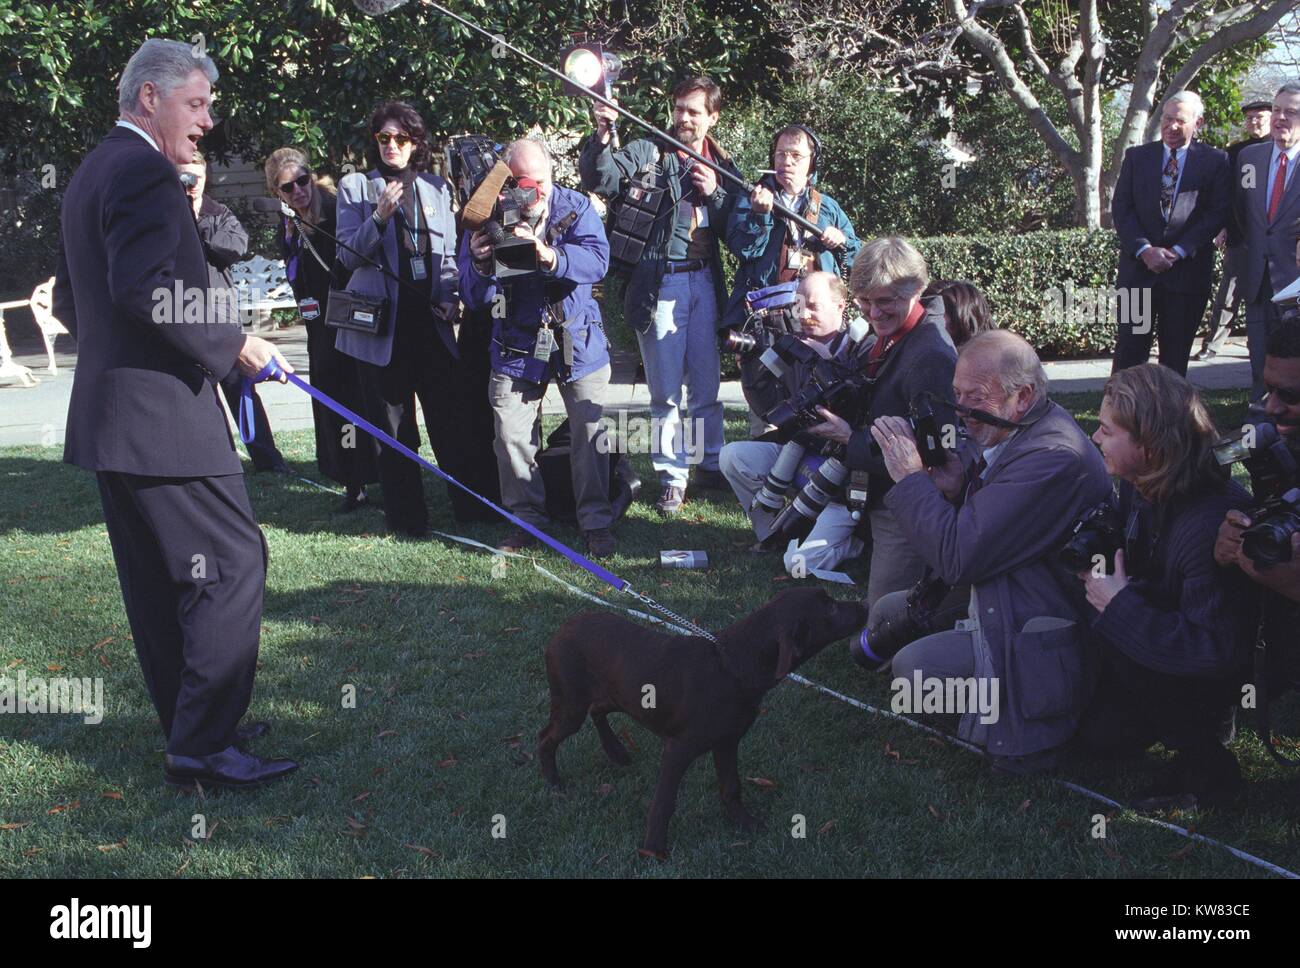 President Bill Clinton, wearing suit, stands addressing the press, crouched in a crowd in front of him flashing cameras and holding microphones, as he introduces the new First Pet, Buddy the dog, a brown labrador connected by a blue leash, sniffing one of the reporters in the grass on the White House lawn, Washington, District of Columbia, December 16, 1997. Stock Photo